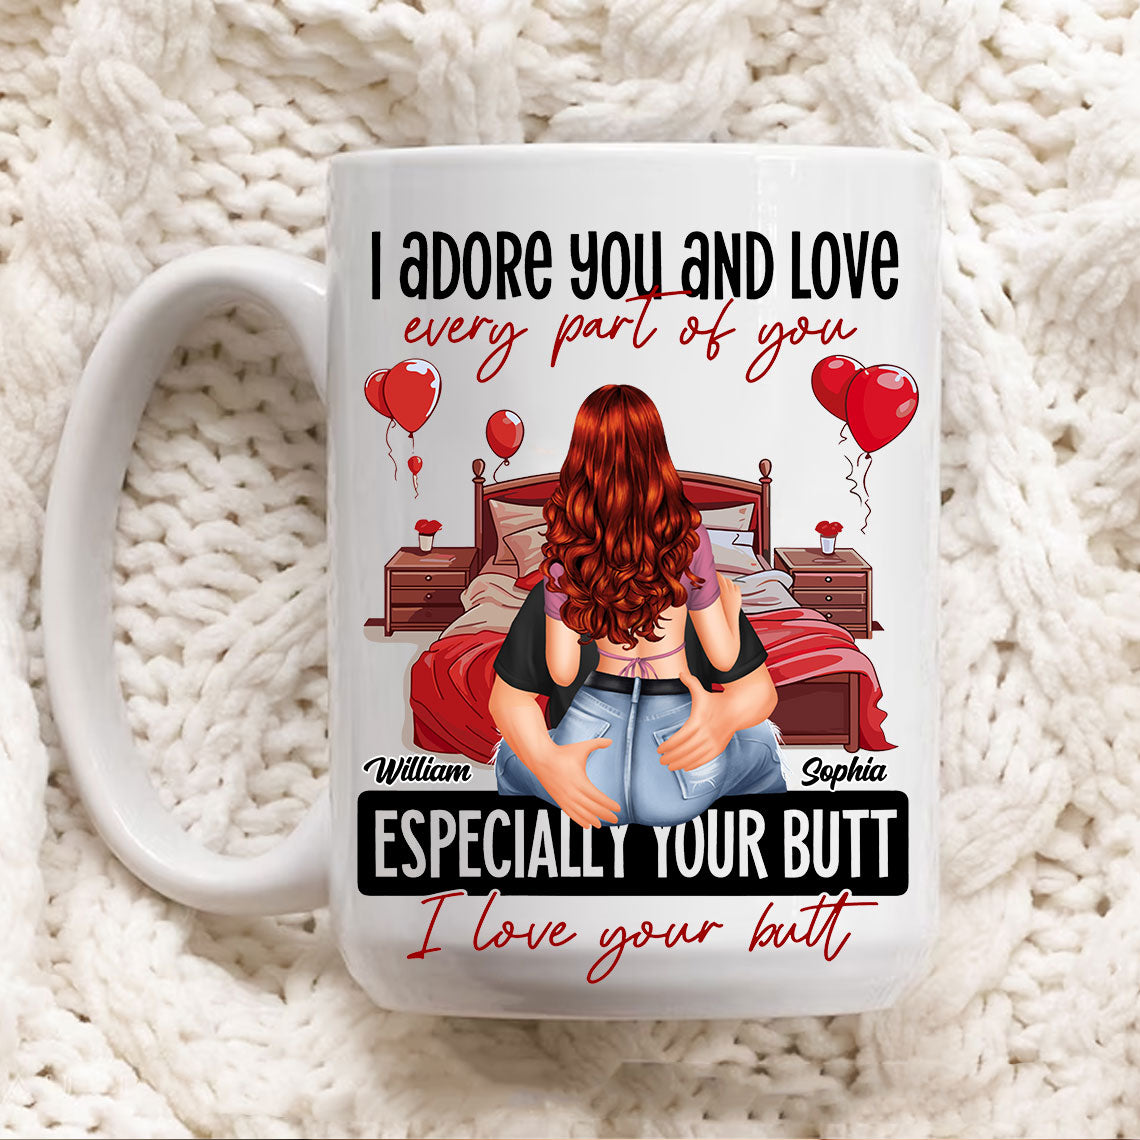 I Adore You And Love Every Part Of You Especially Your Butt I Love Your Butt - Custom Appearances And Names, Personalized White Mug